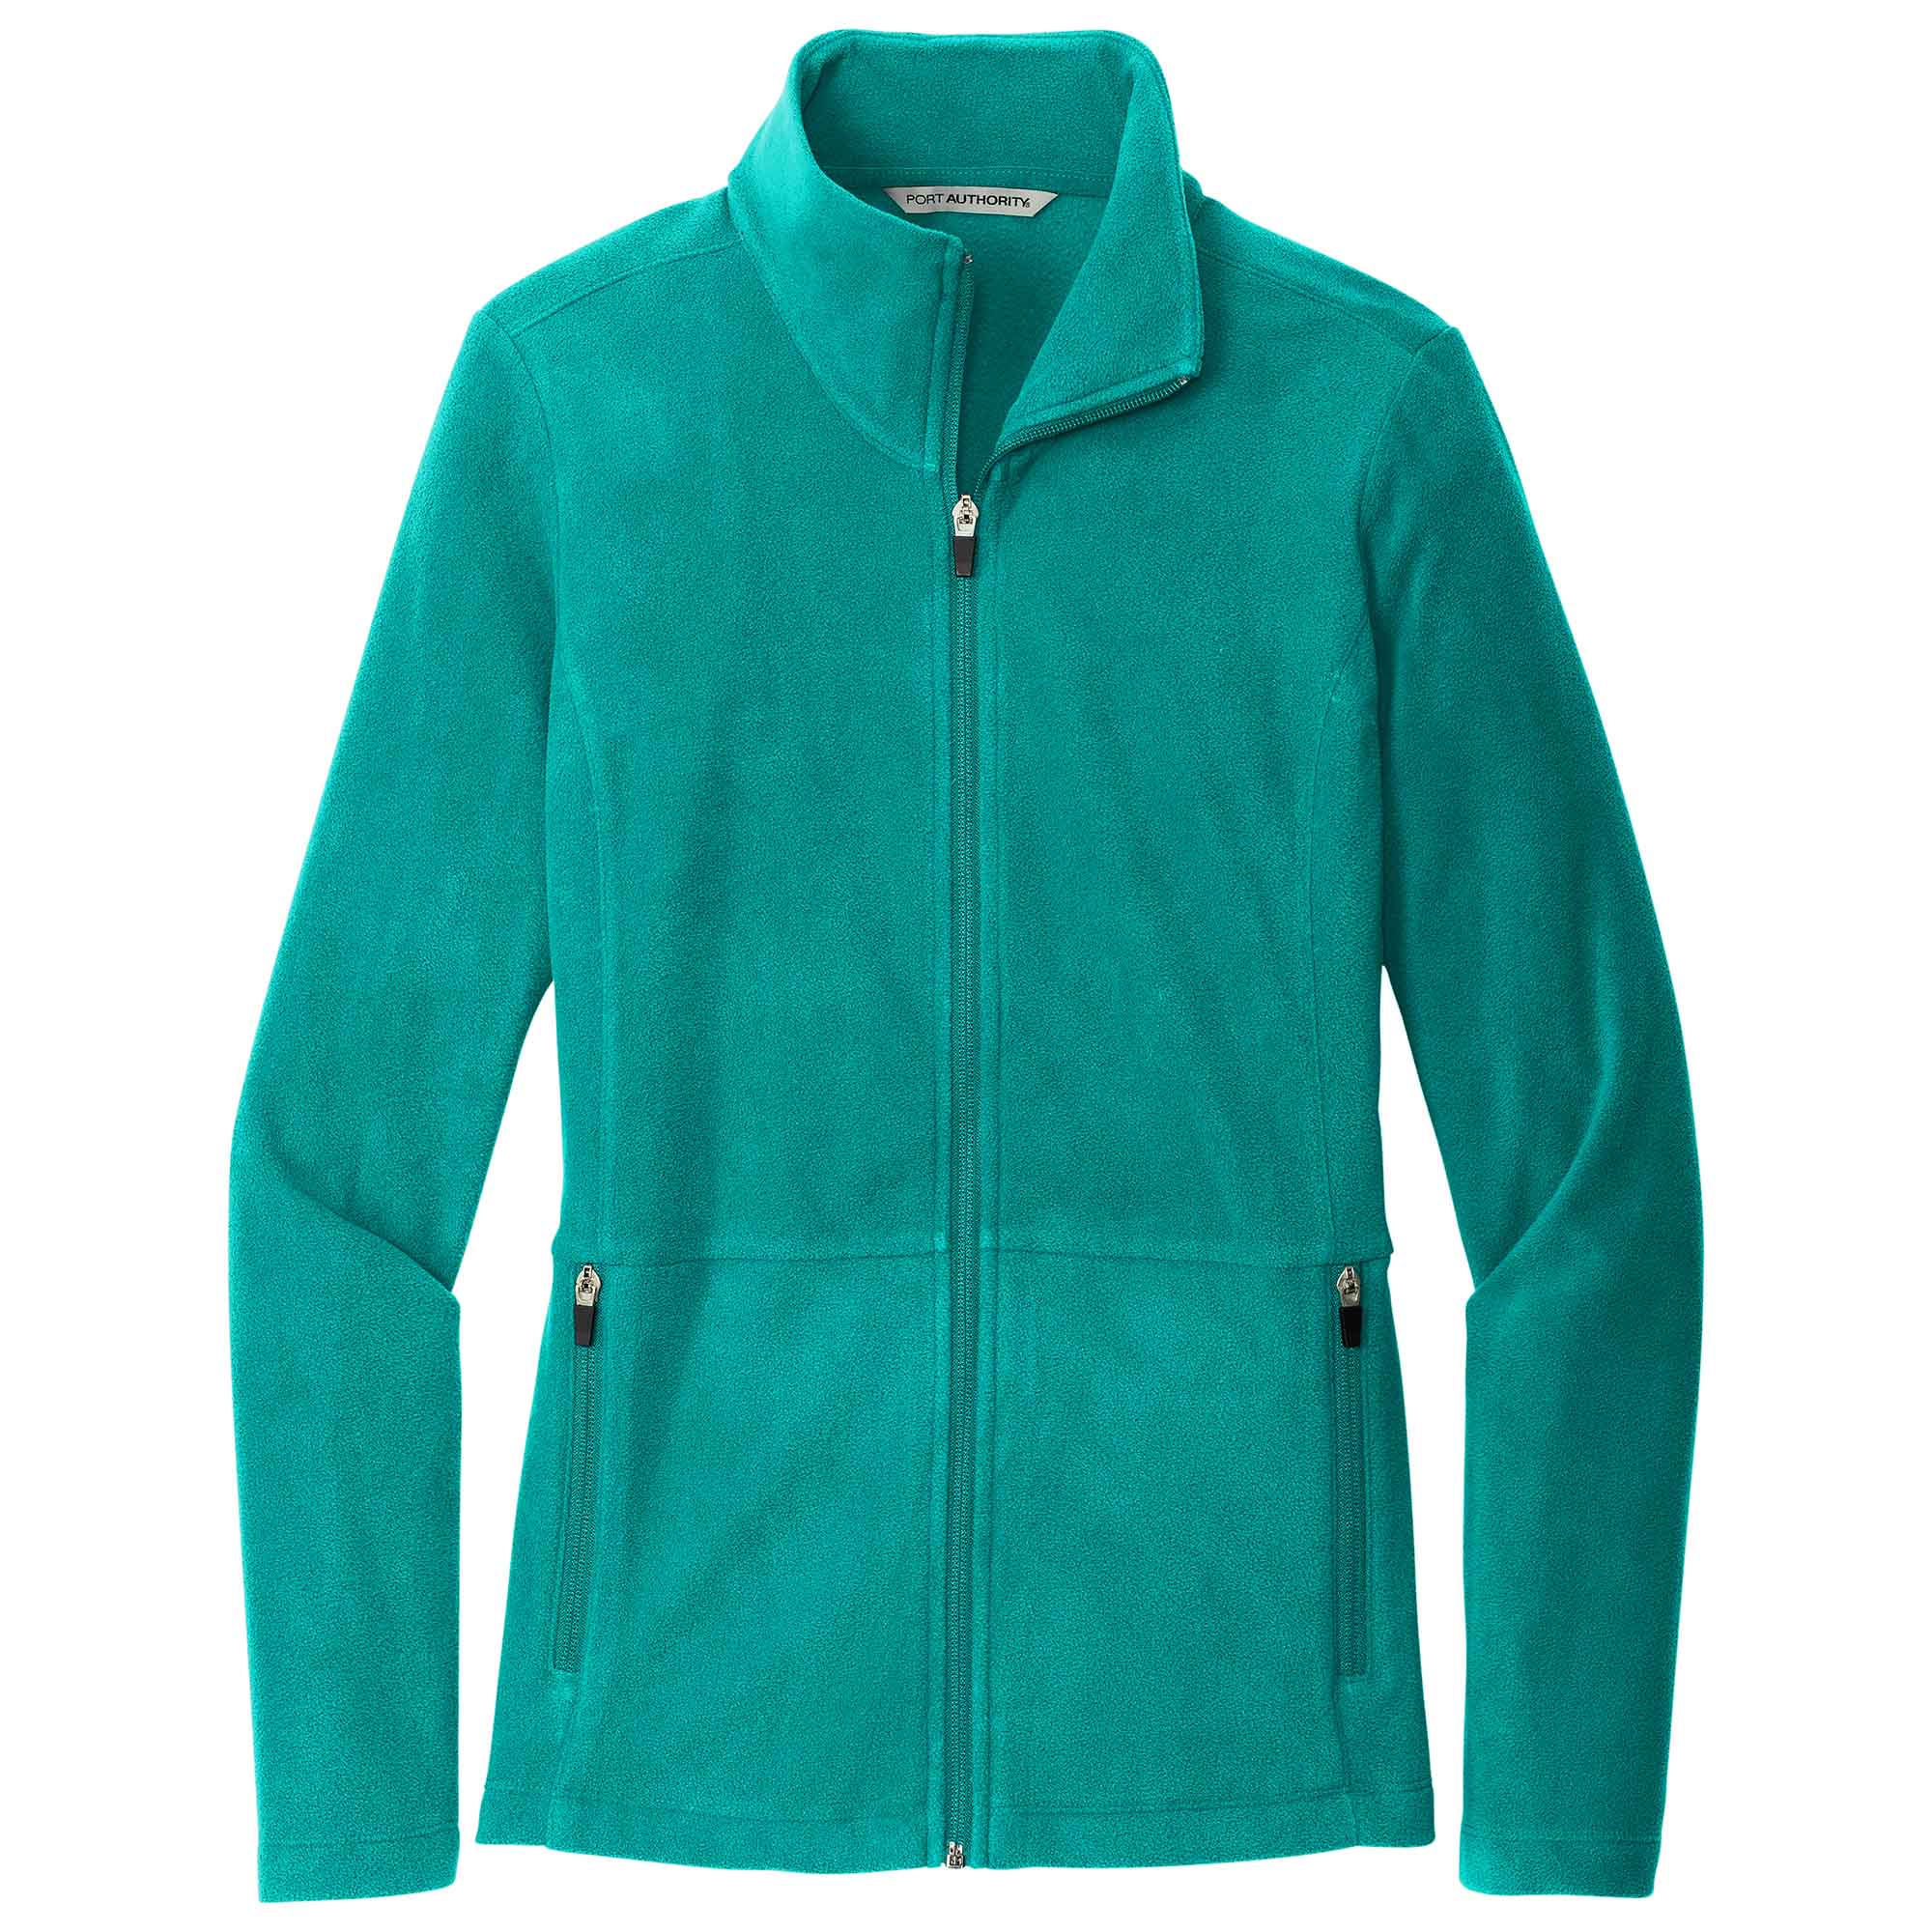 Port Authority L151 Ladies Accord Microfleece Jacket - Teal Blue | Full ...